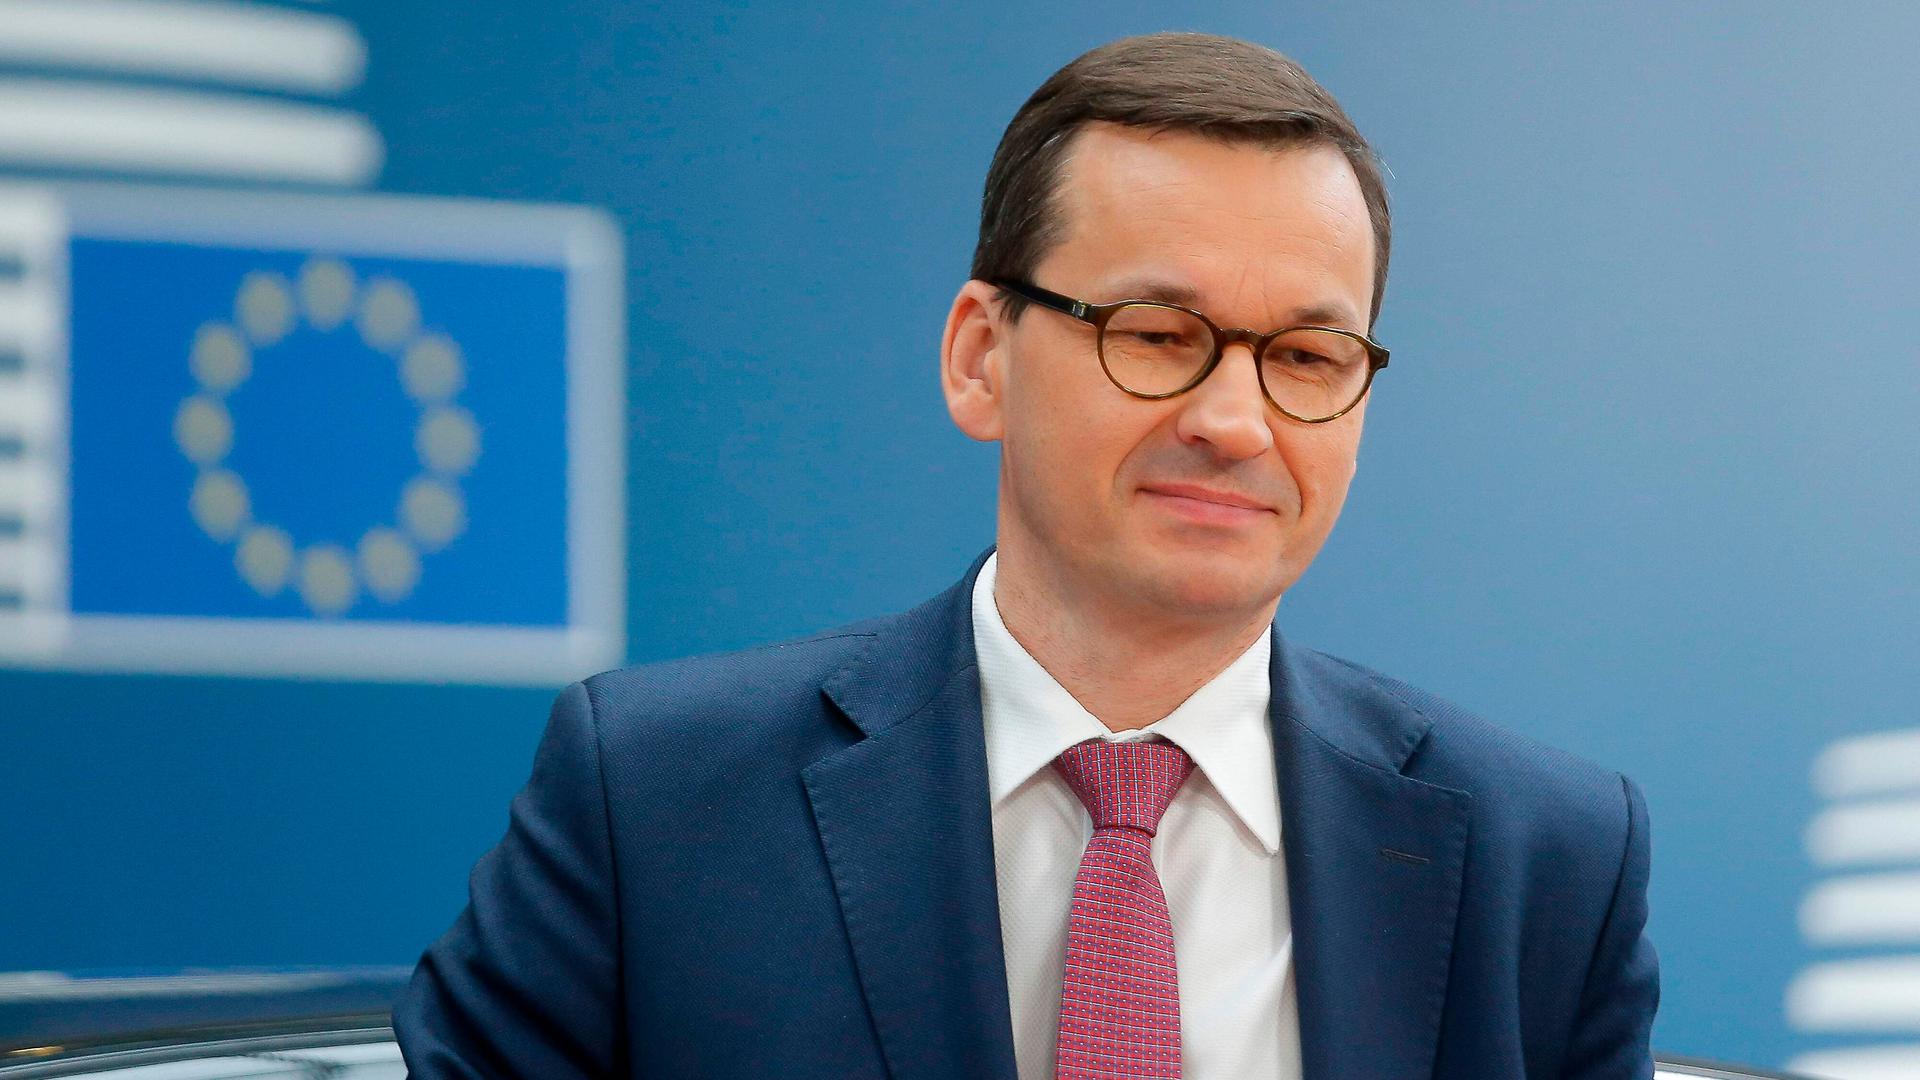 Poland's Prime Minister Mateusz Morawiecki, whose government has been embroiled in a row with the EU over several issues including anti-LGBTQ policies